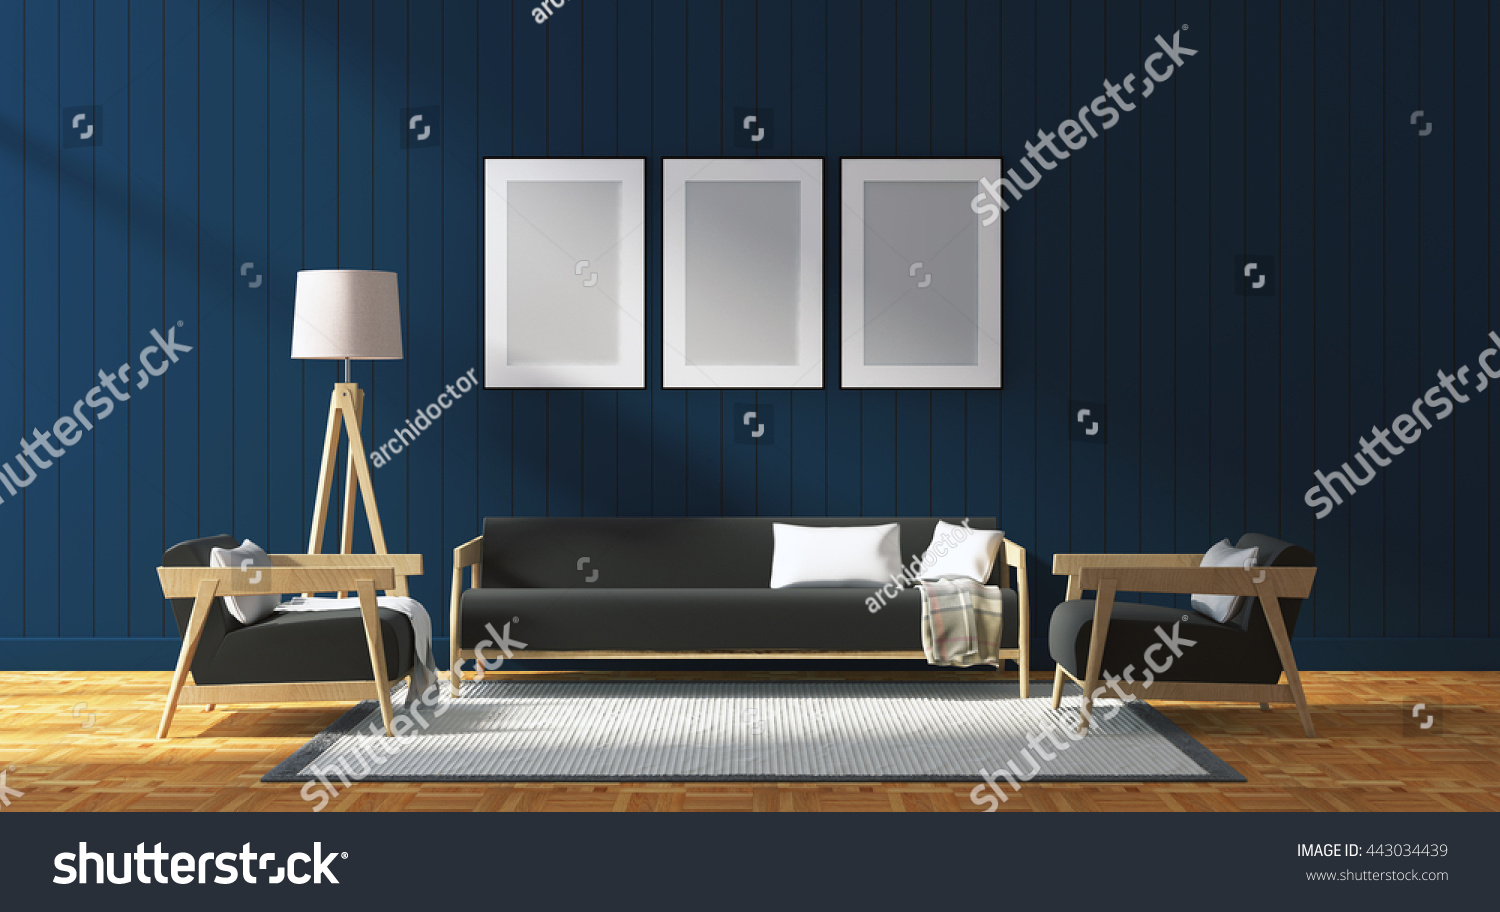 Simple Living Room Navy Blue Wall Stock Illustration 443034439,Round Chandelier Over Rectangular Table